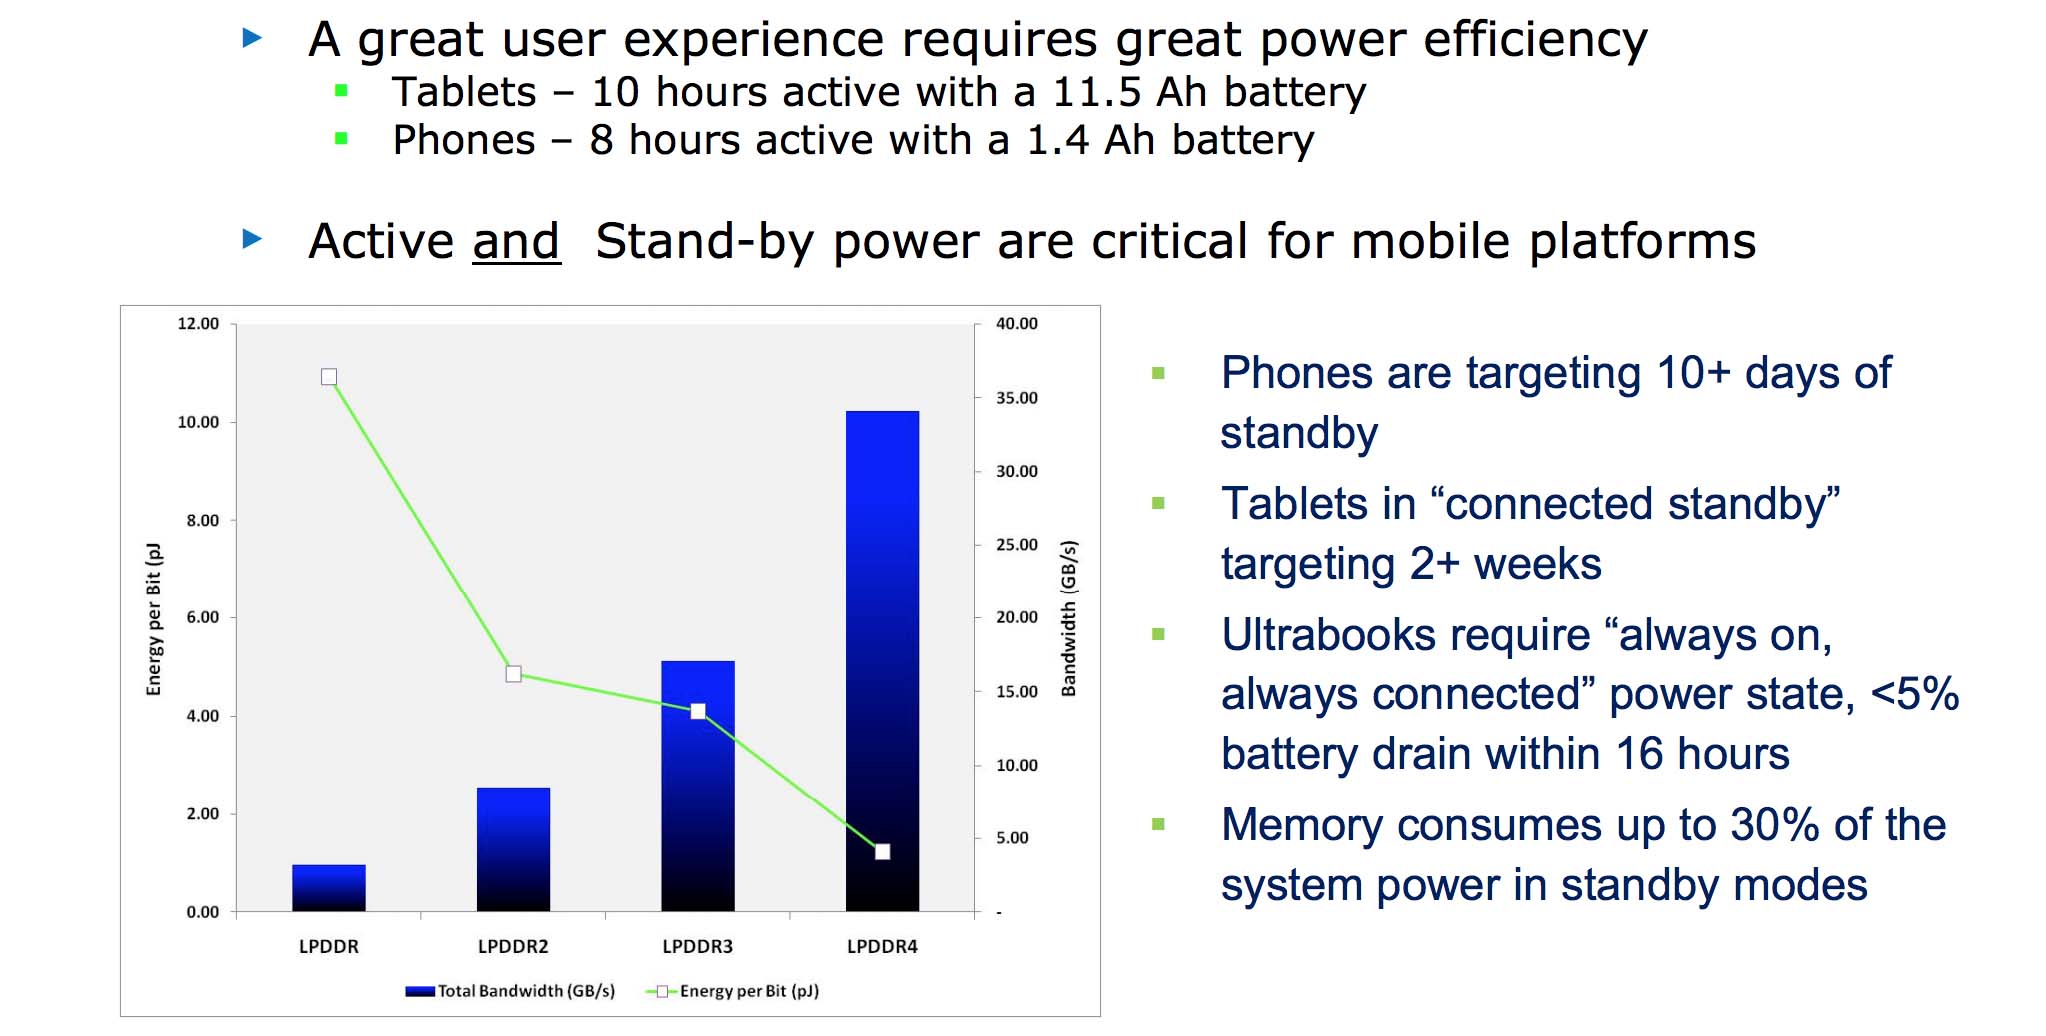 Low power requirements are essential for mobile and LPDDR4 is the most energy efficient memory yet.